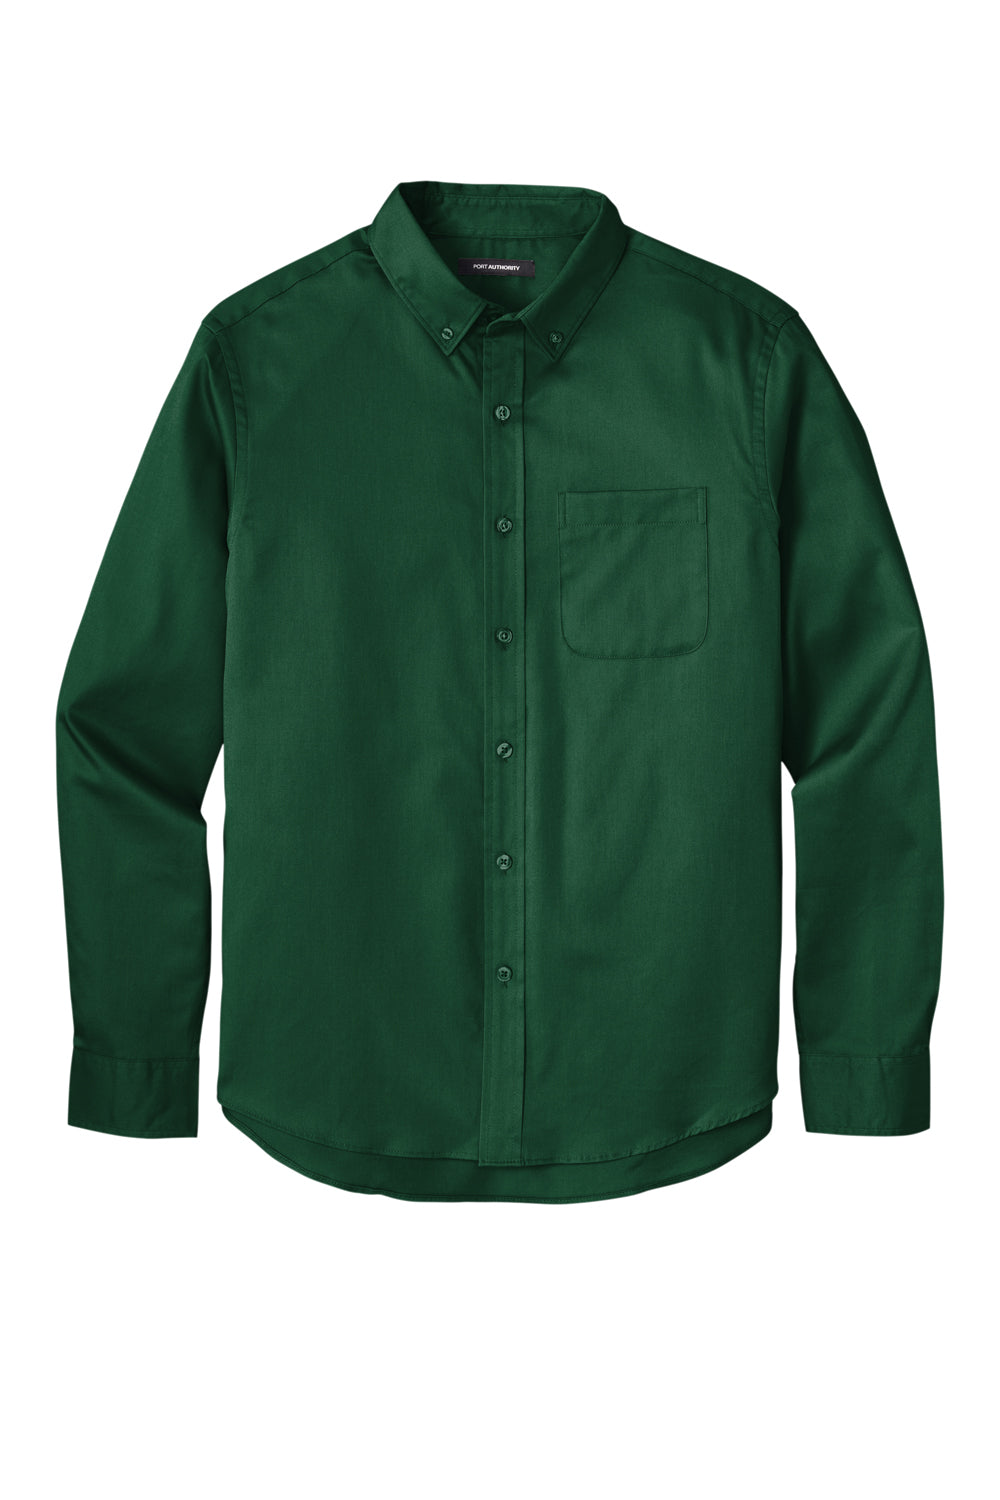 Port Authority W808 SuperPro Wrinkle Resistant React Long Sleeve Button Down Shirt w/ Pocket Dark Green Flat Front